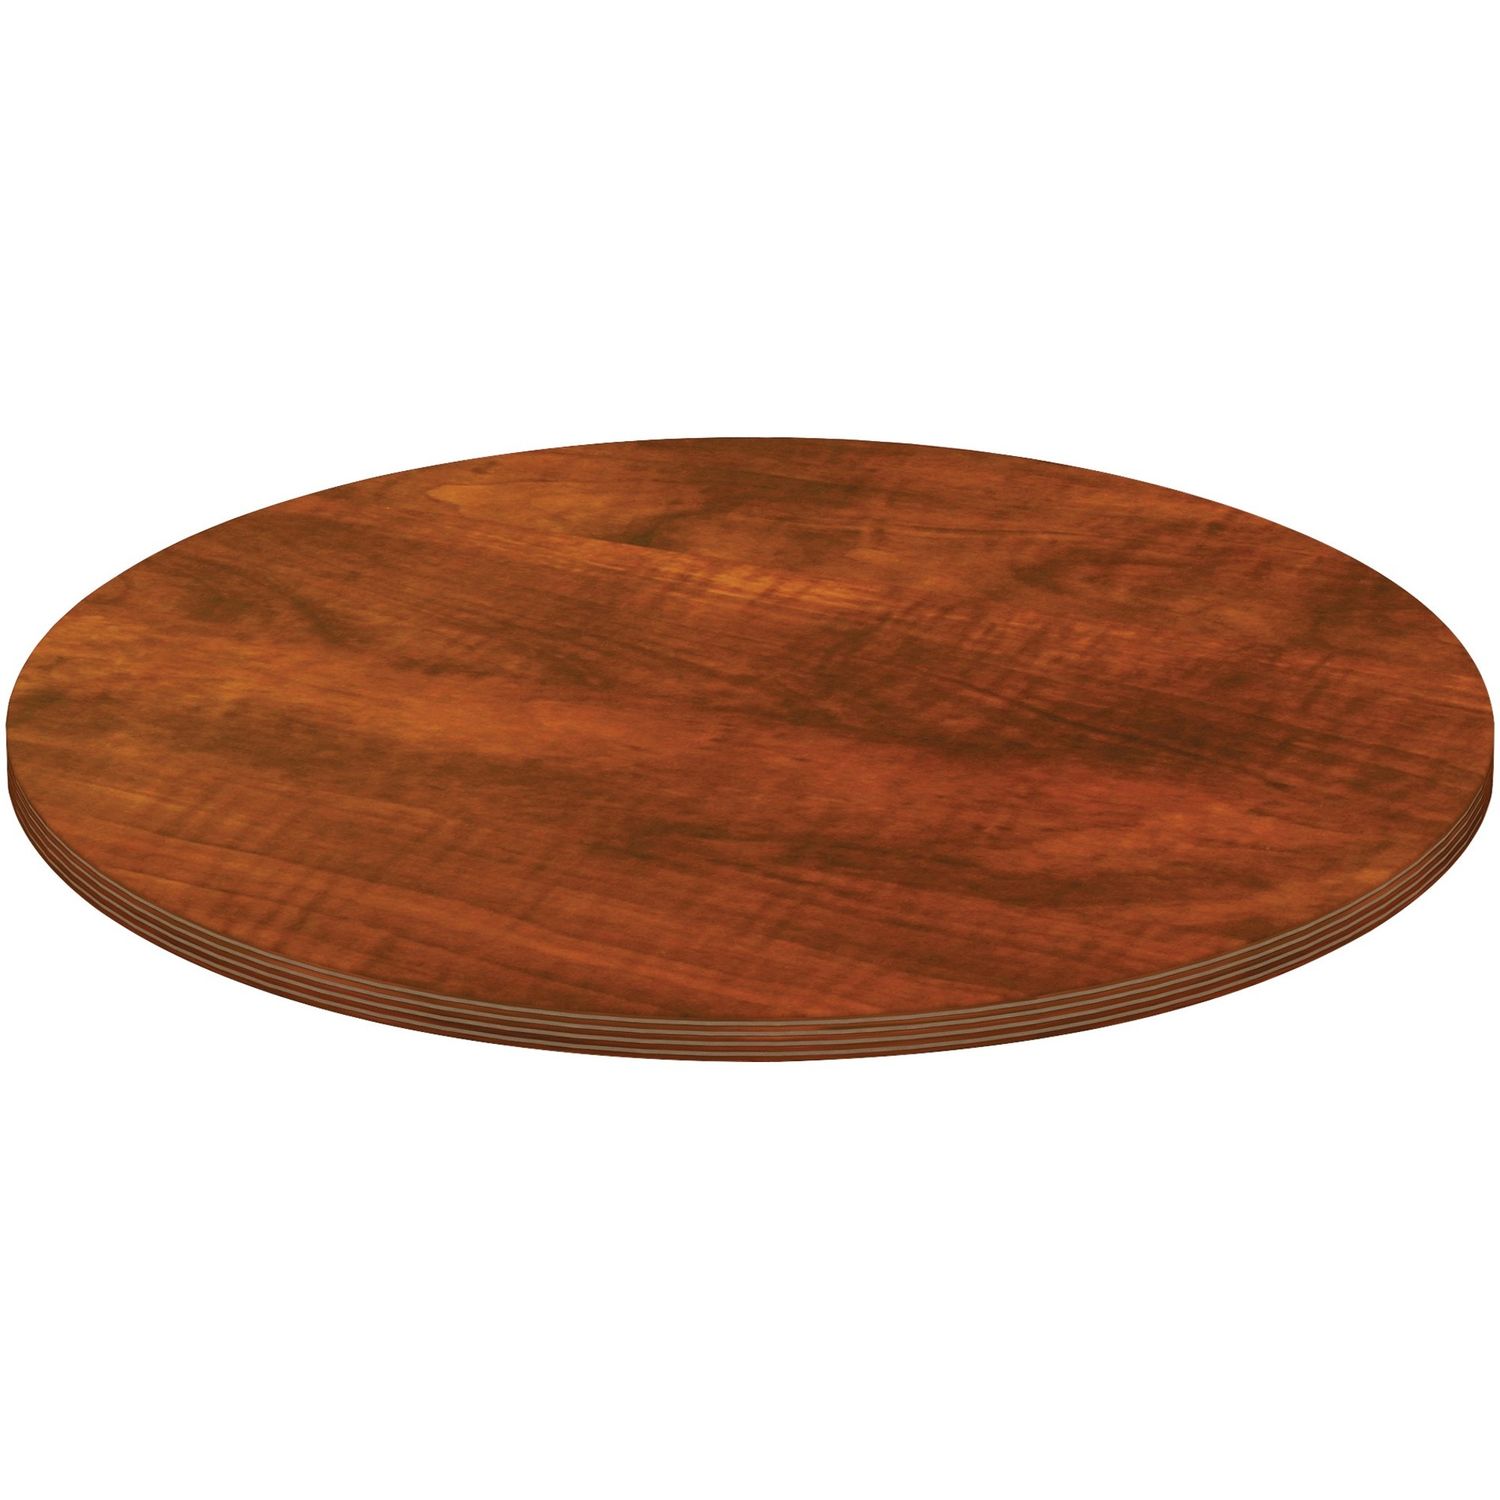 Chateau Tabletop 1.5"48" Top, Reeded Edge, Finish: Cherry Laminate